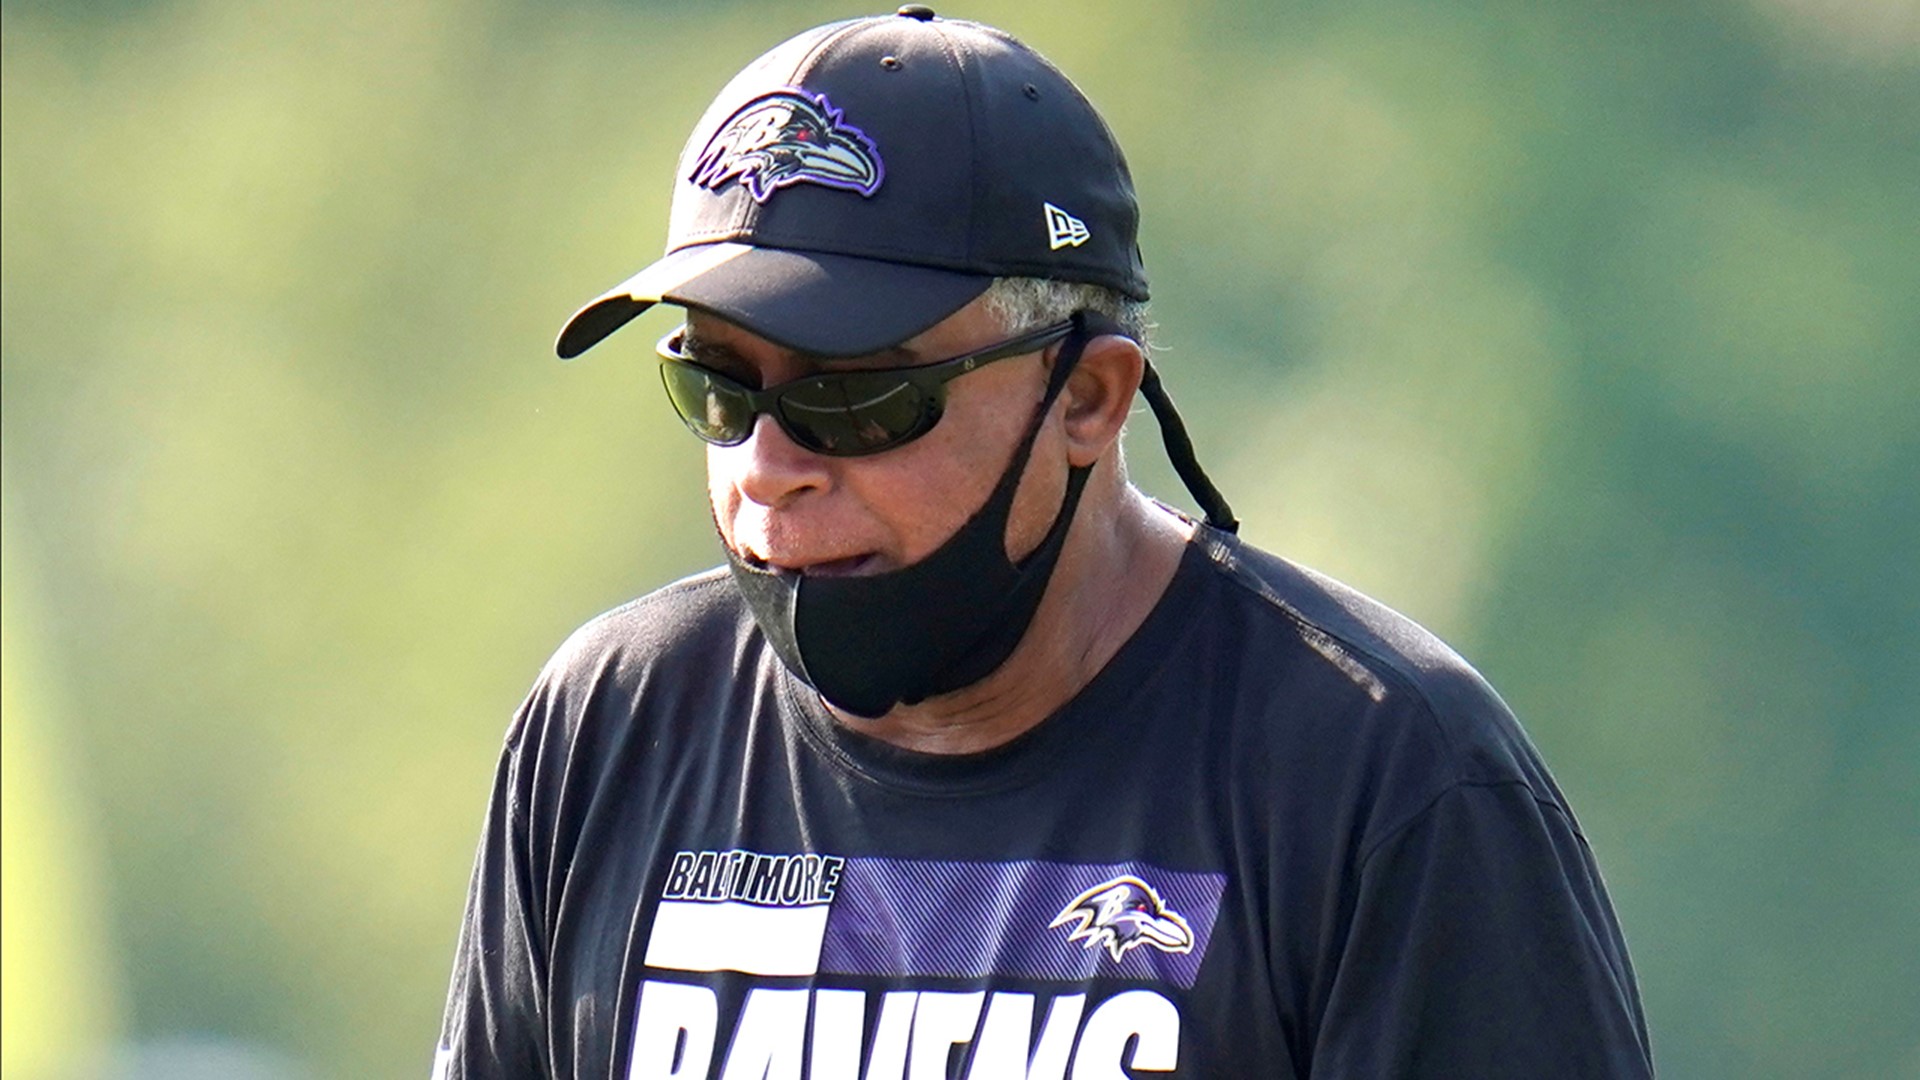 The longtime NFL coach last was with the Baltimore Ravens where he was the assistant head coach and passing game coordinator for the league's worst aerial attack.